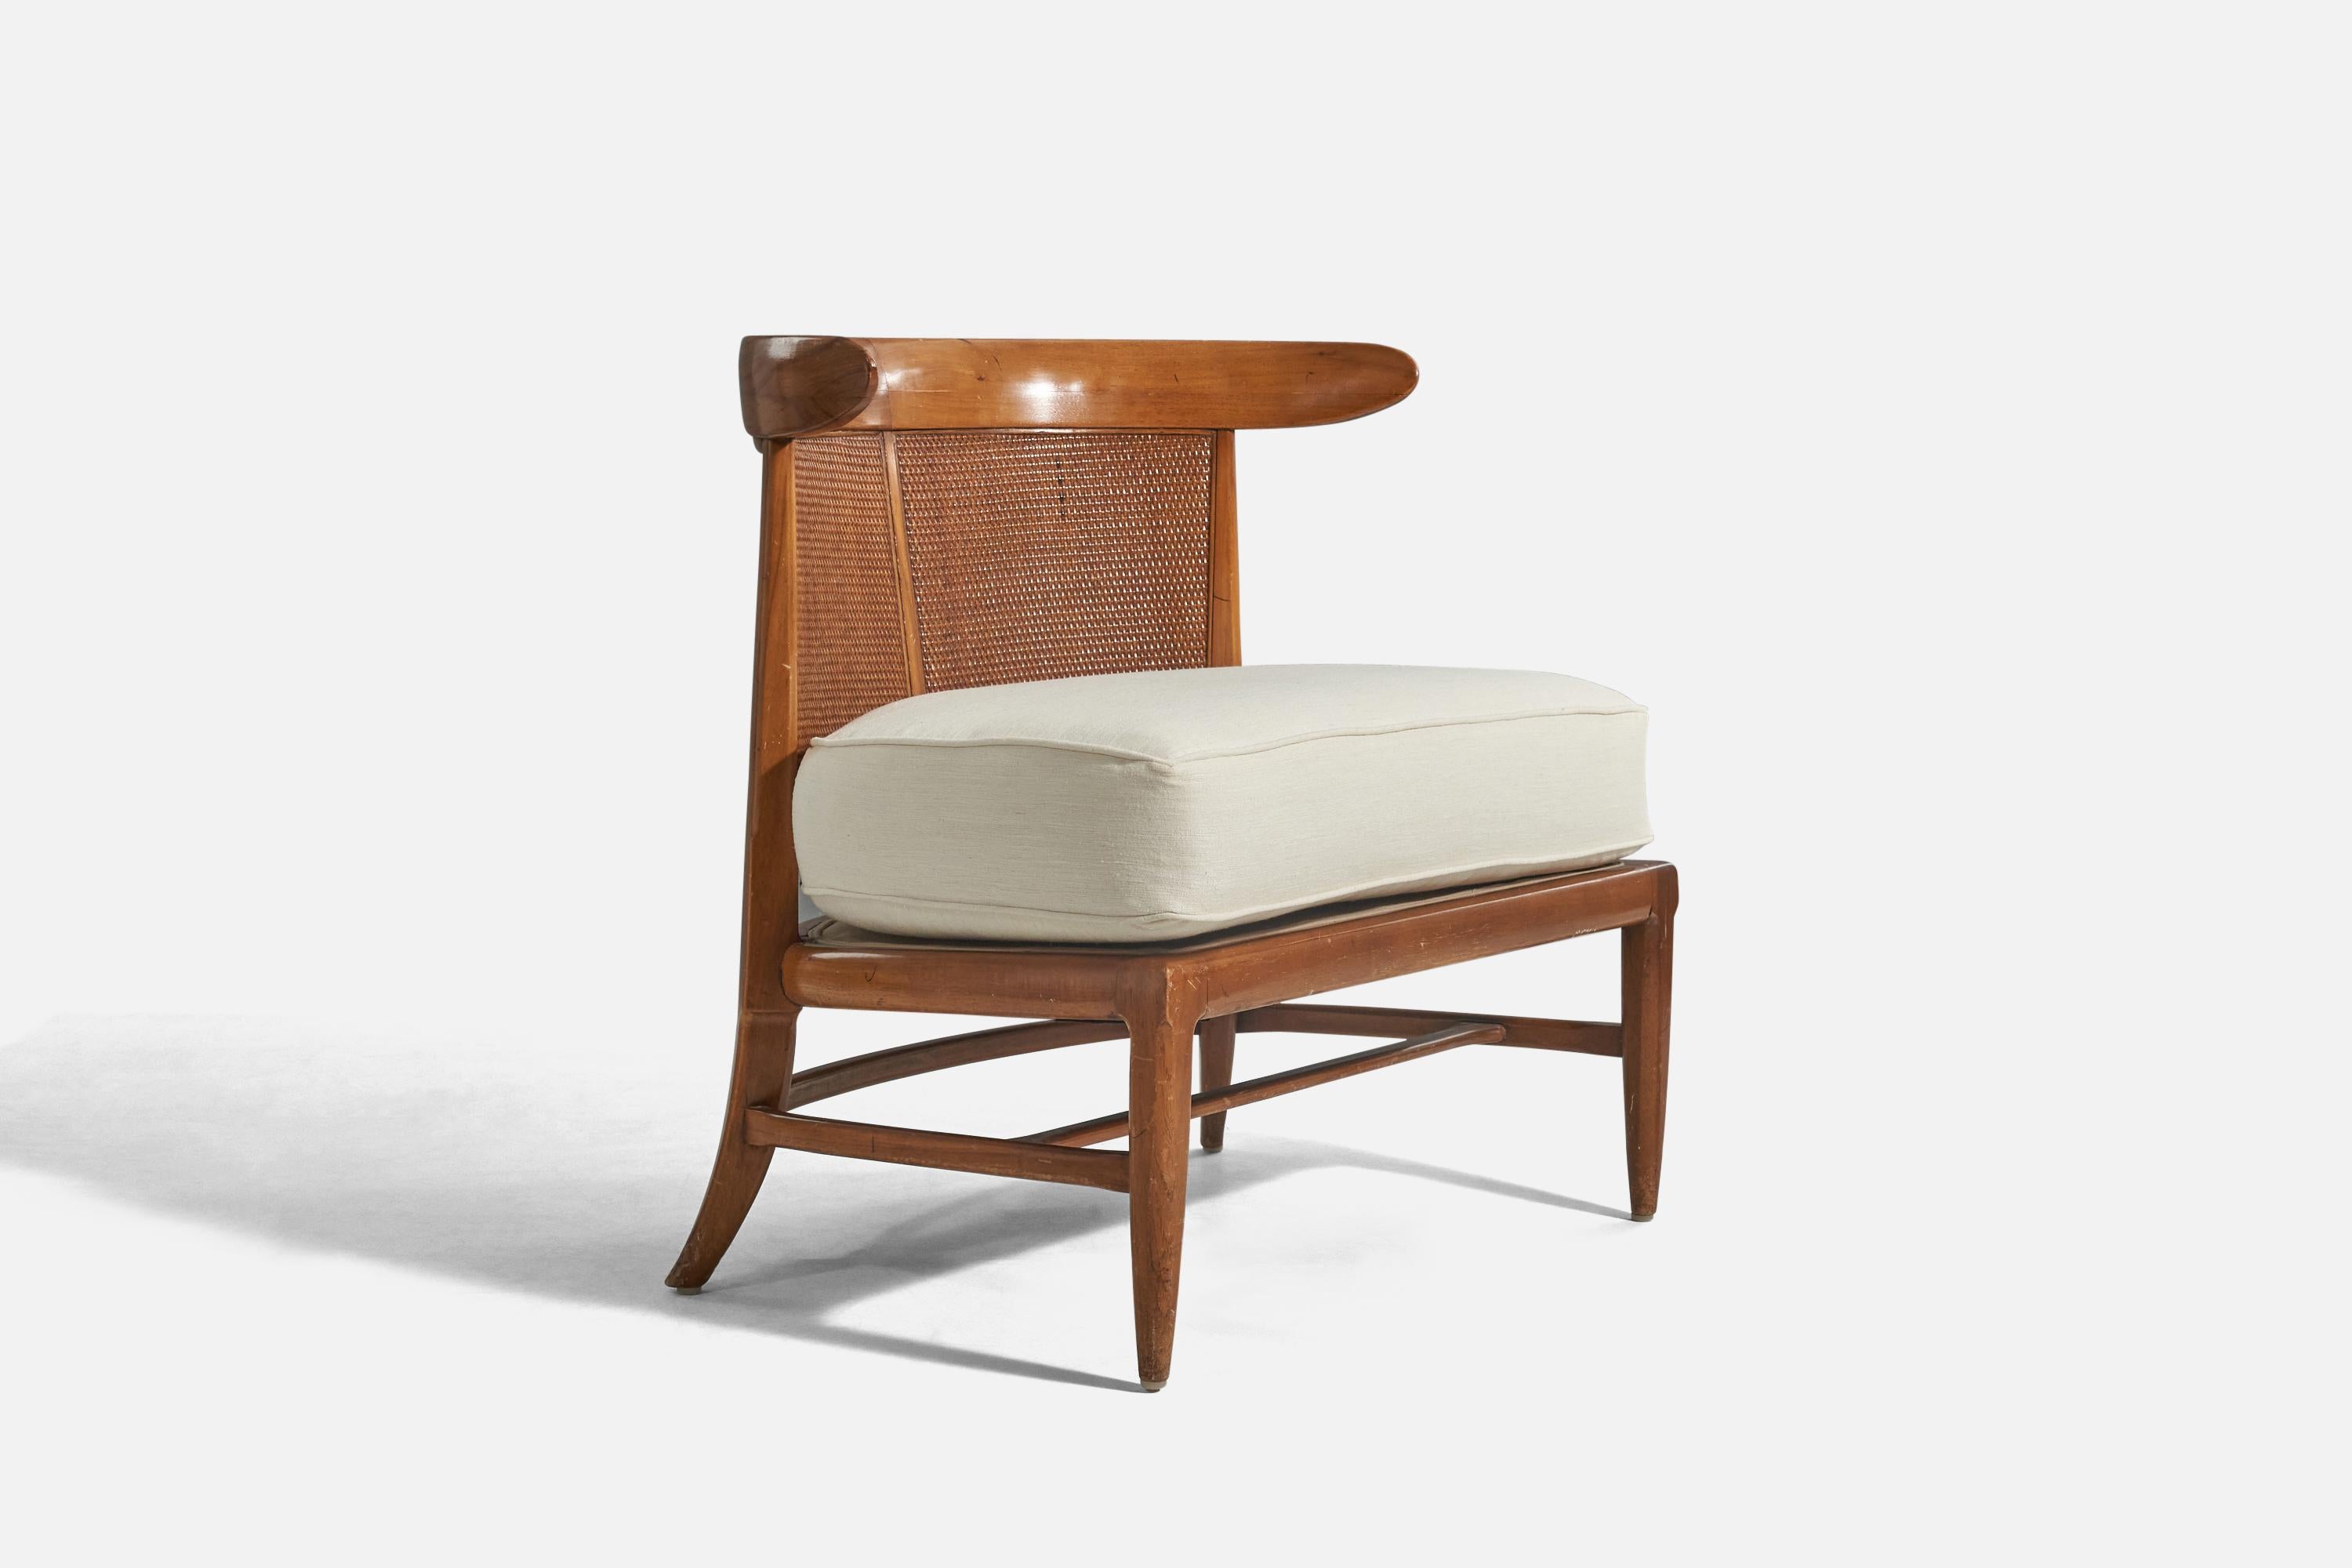 A walnut, cane and white fabric slipper chair designed by John Lubberts & Lambert Mulder and produced by Tomlinson, USA, circa 1950.

